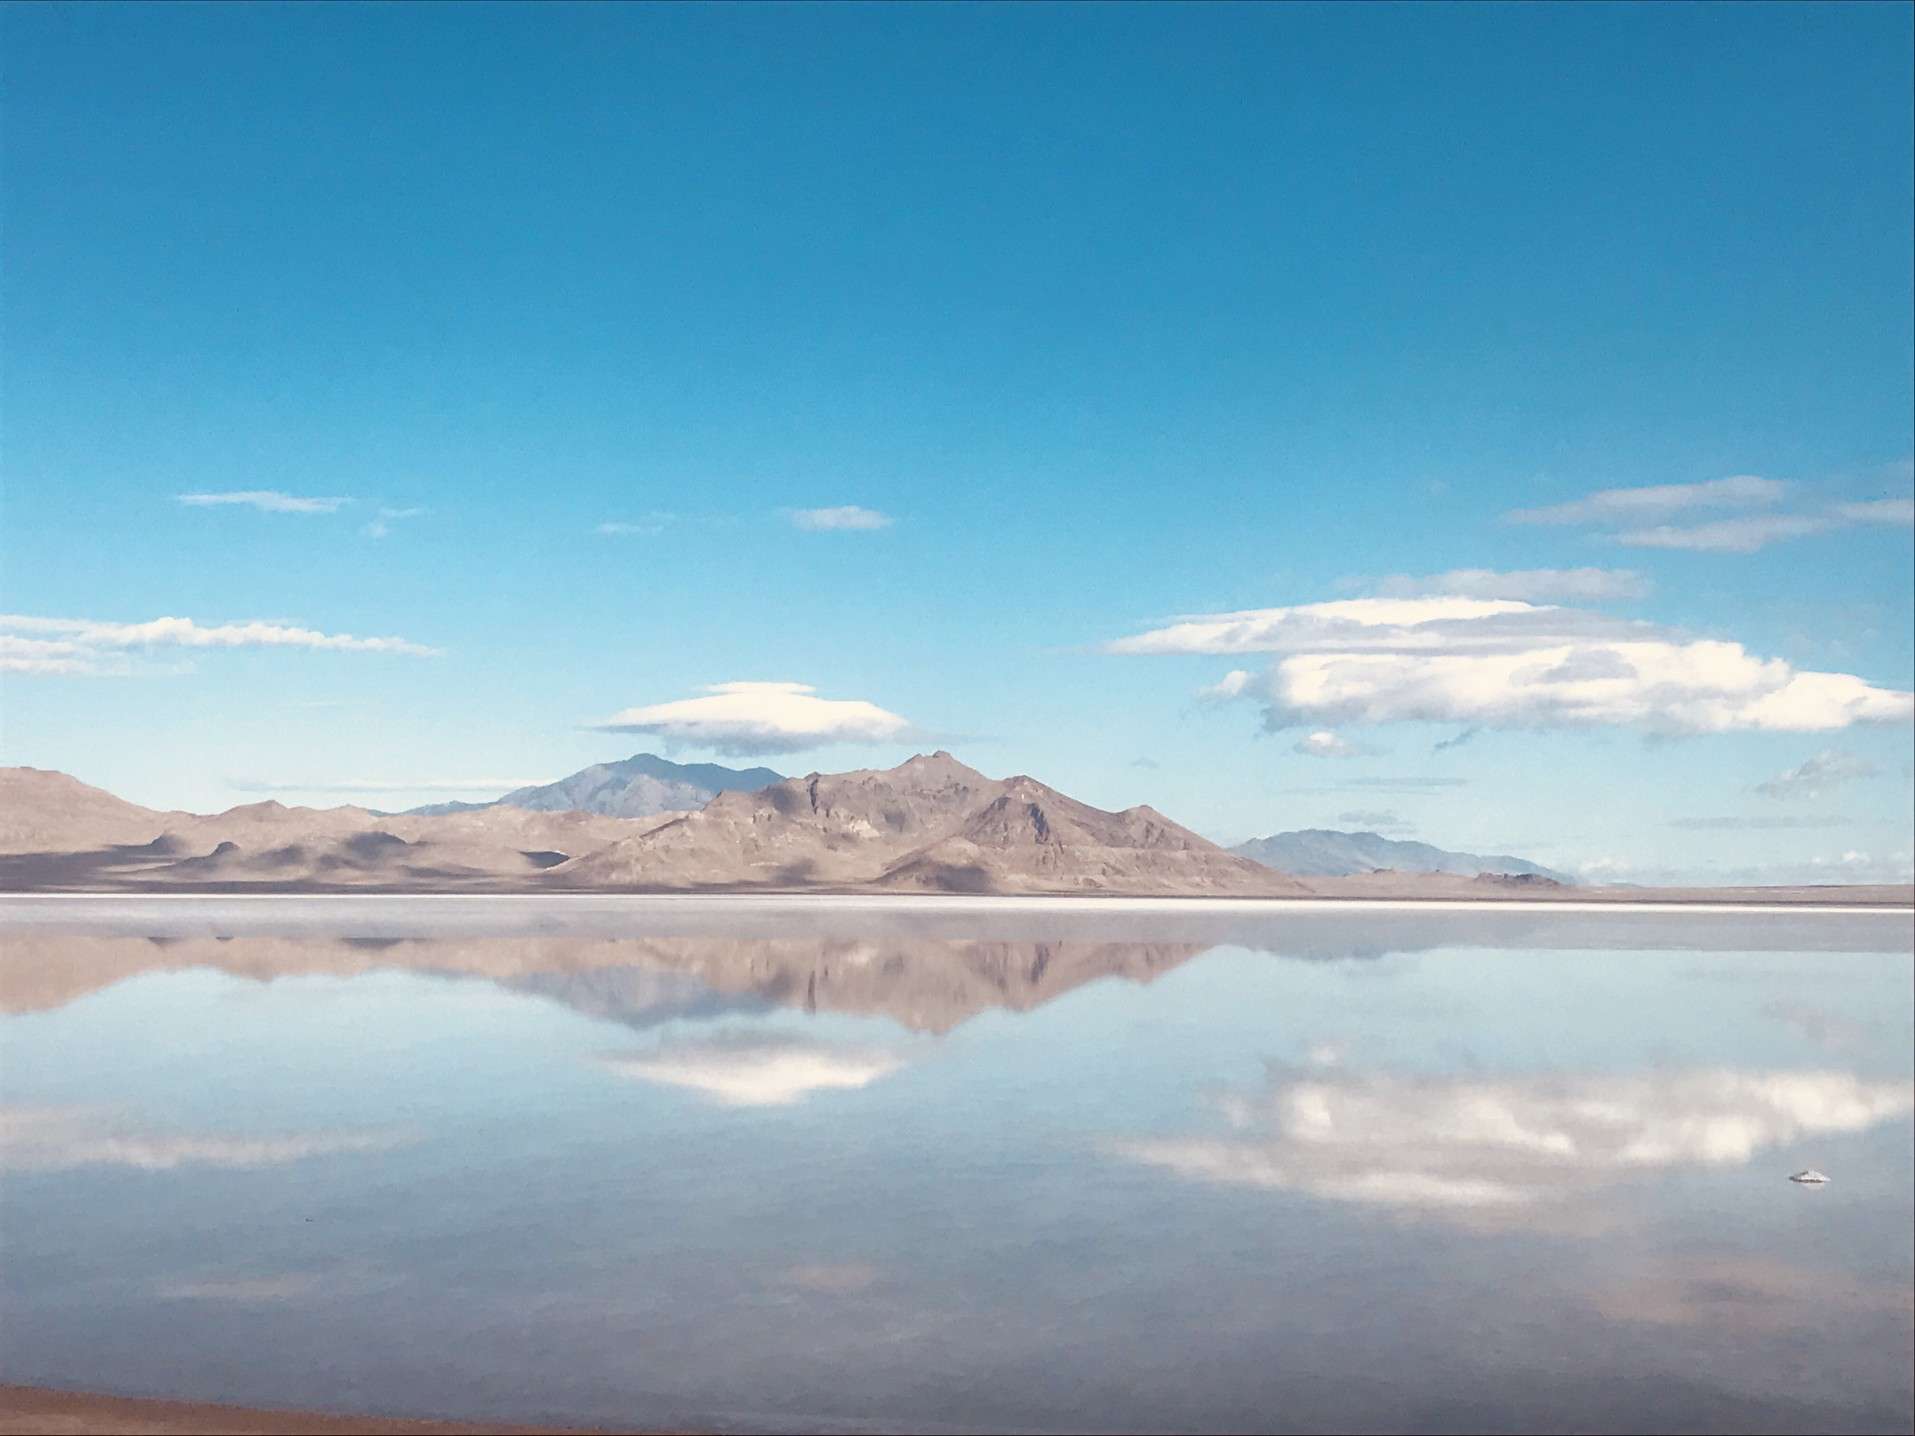 Scenic view of mountains surrounding the Great Salt Lake